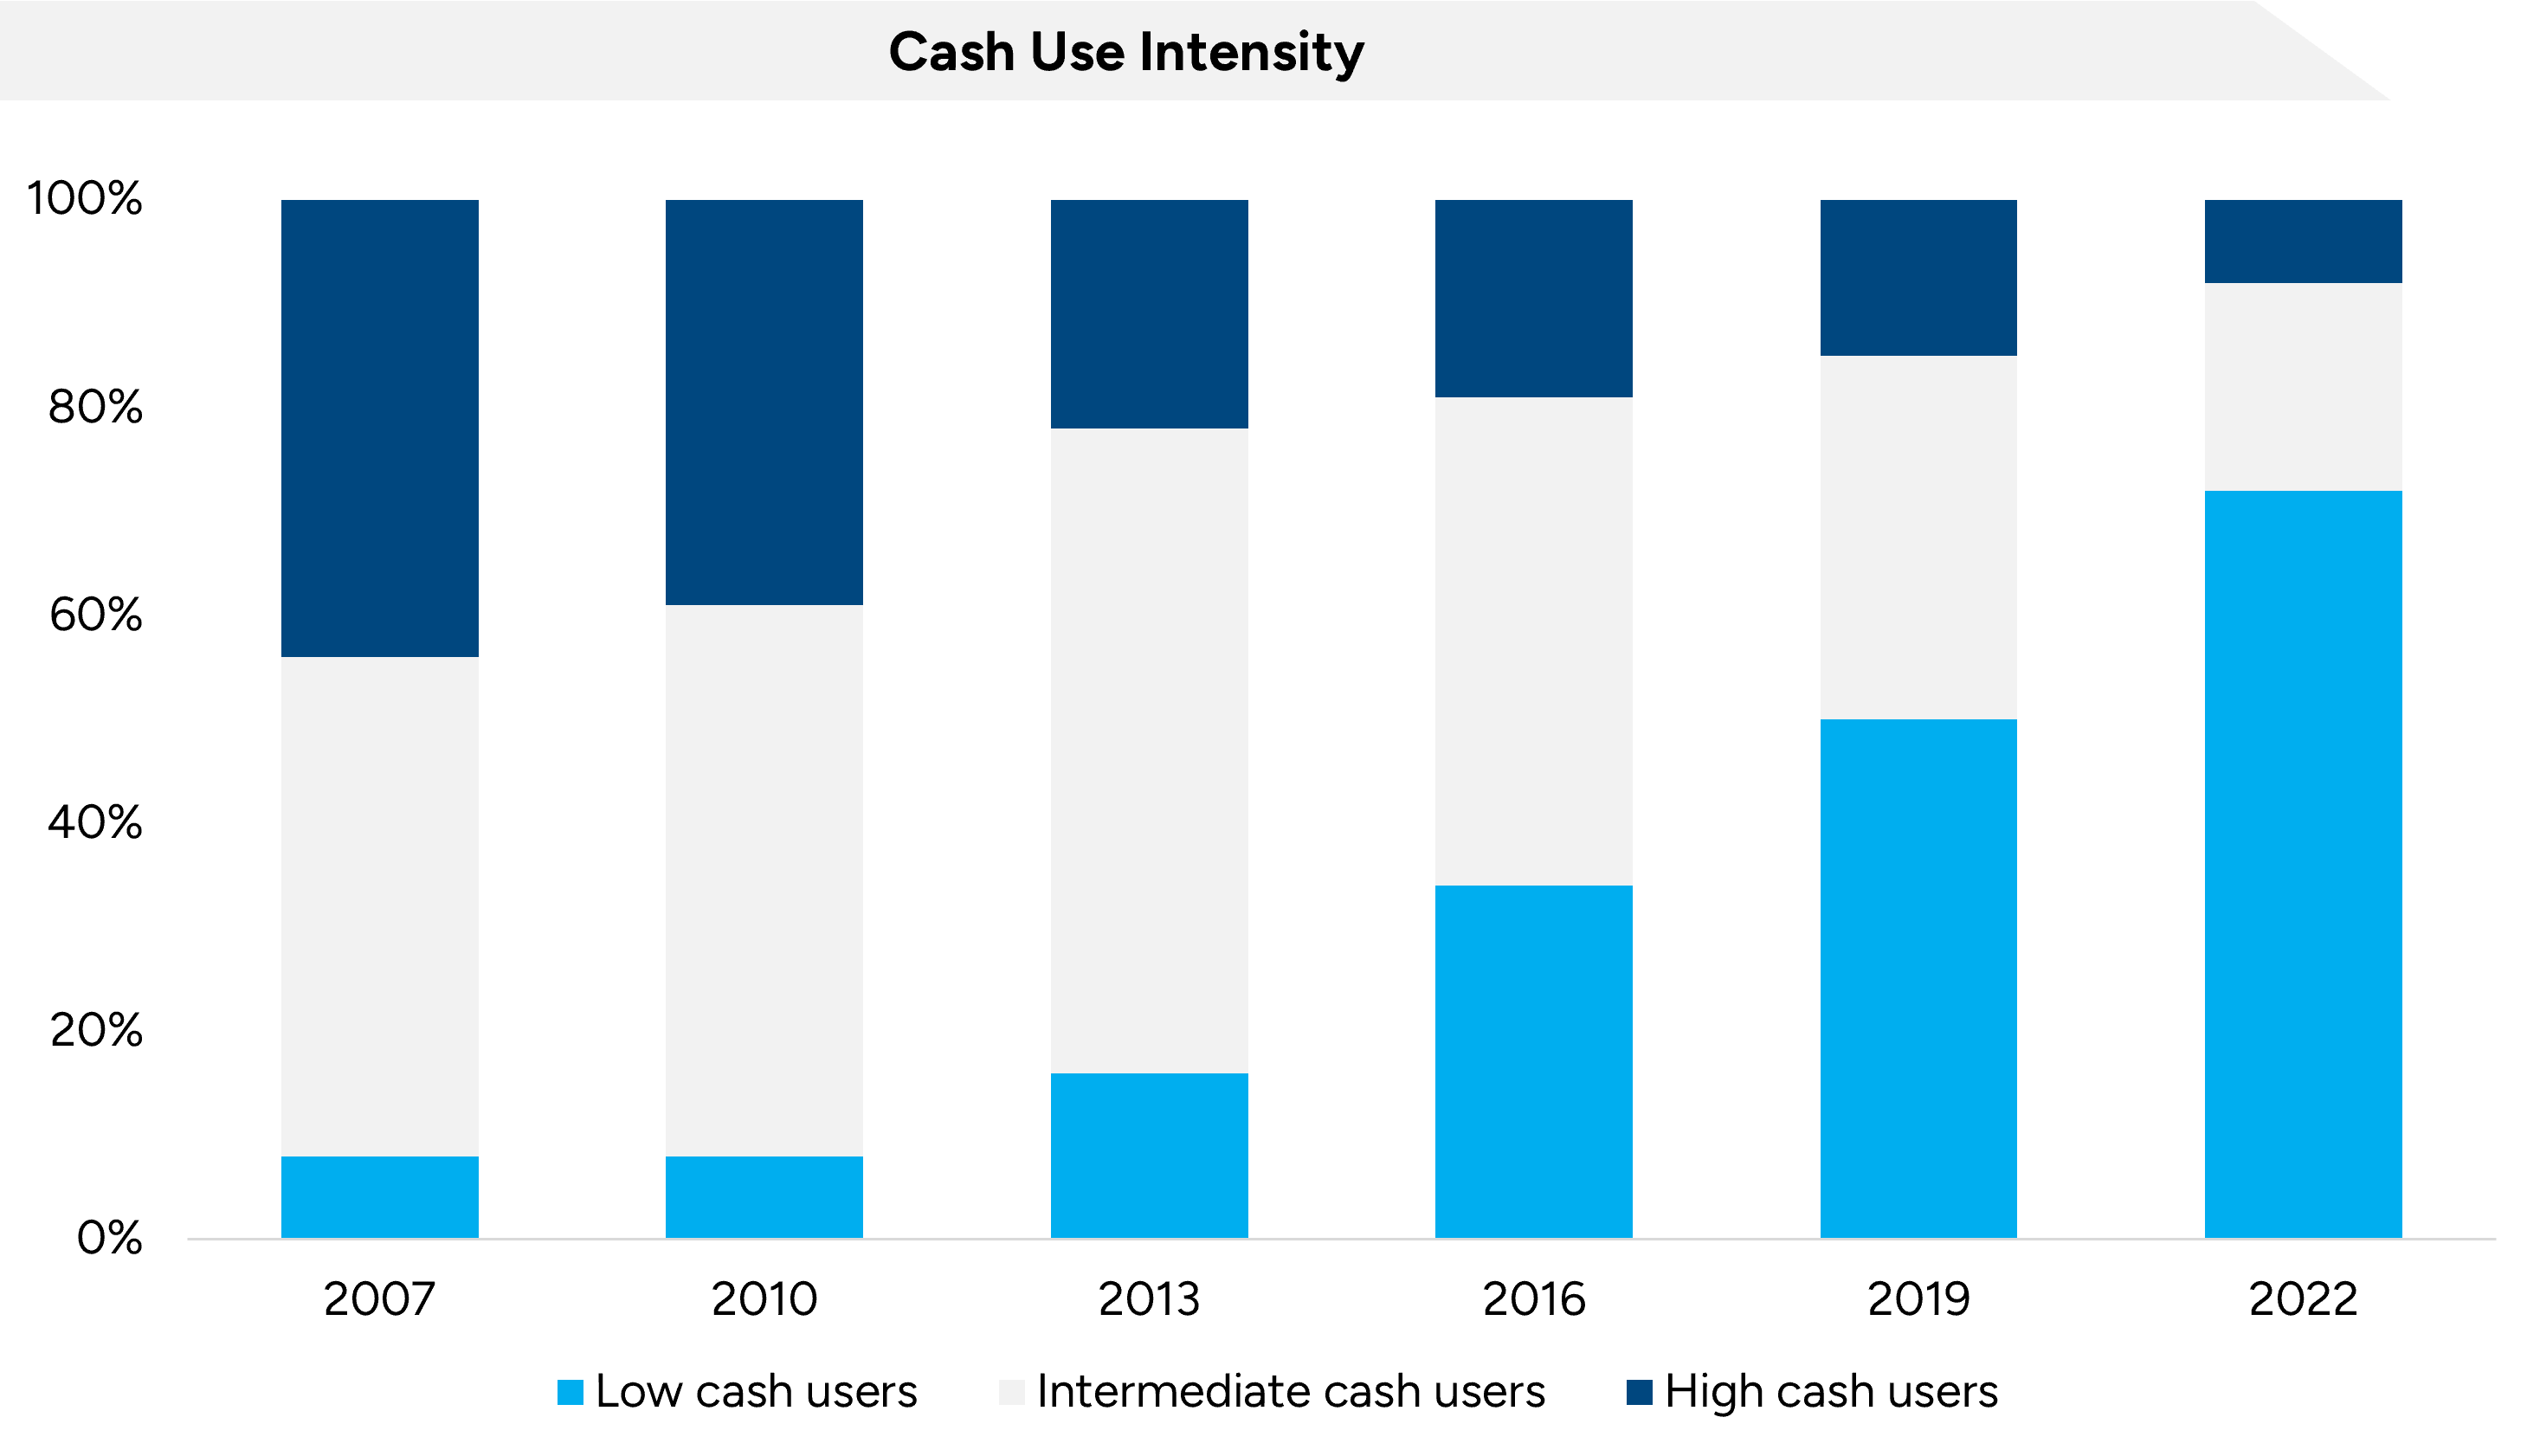 Cash Use Intensity - cashless society: physical currency in 2023 and beyond